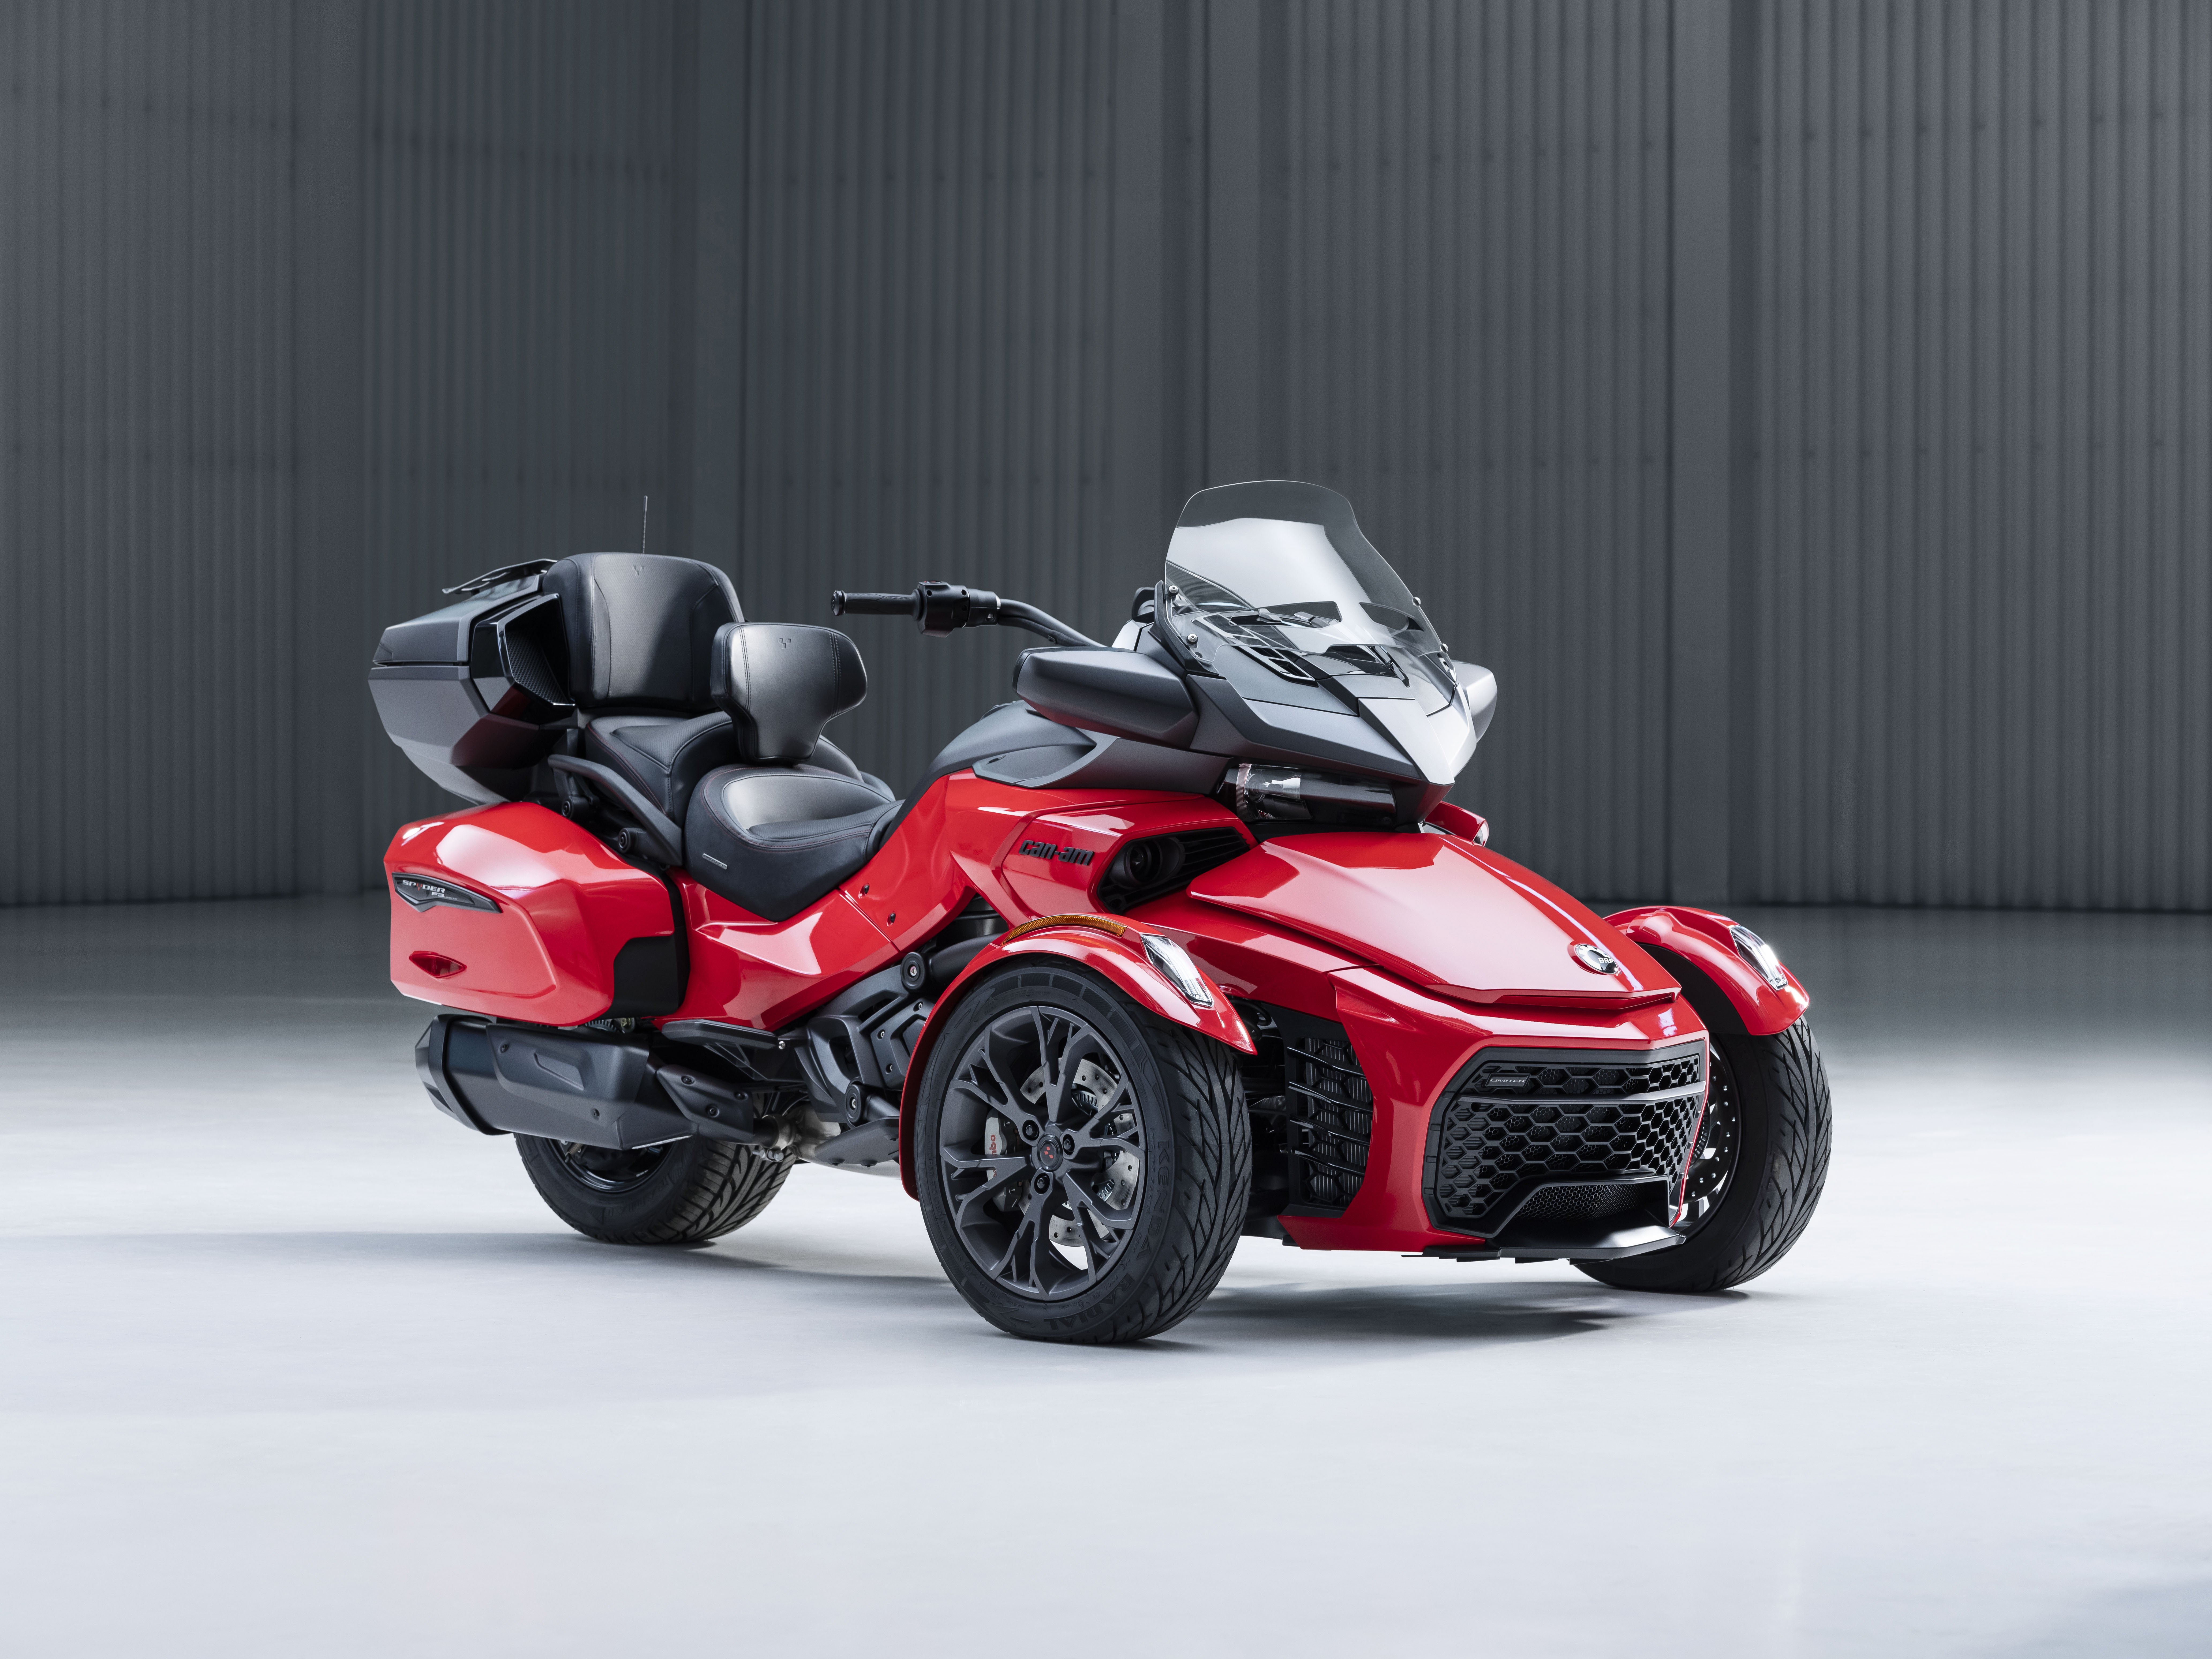 SPYDER F3 LIMITED SPECIAL SERIES